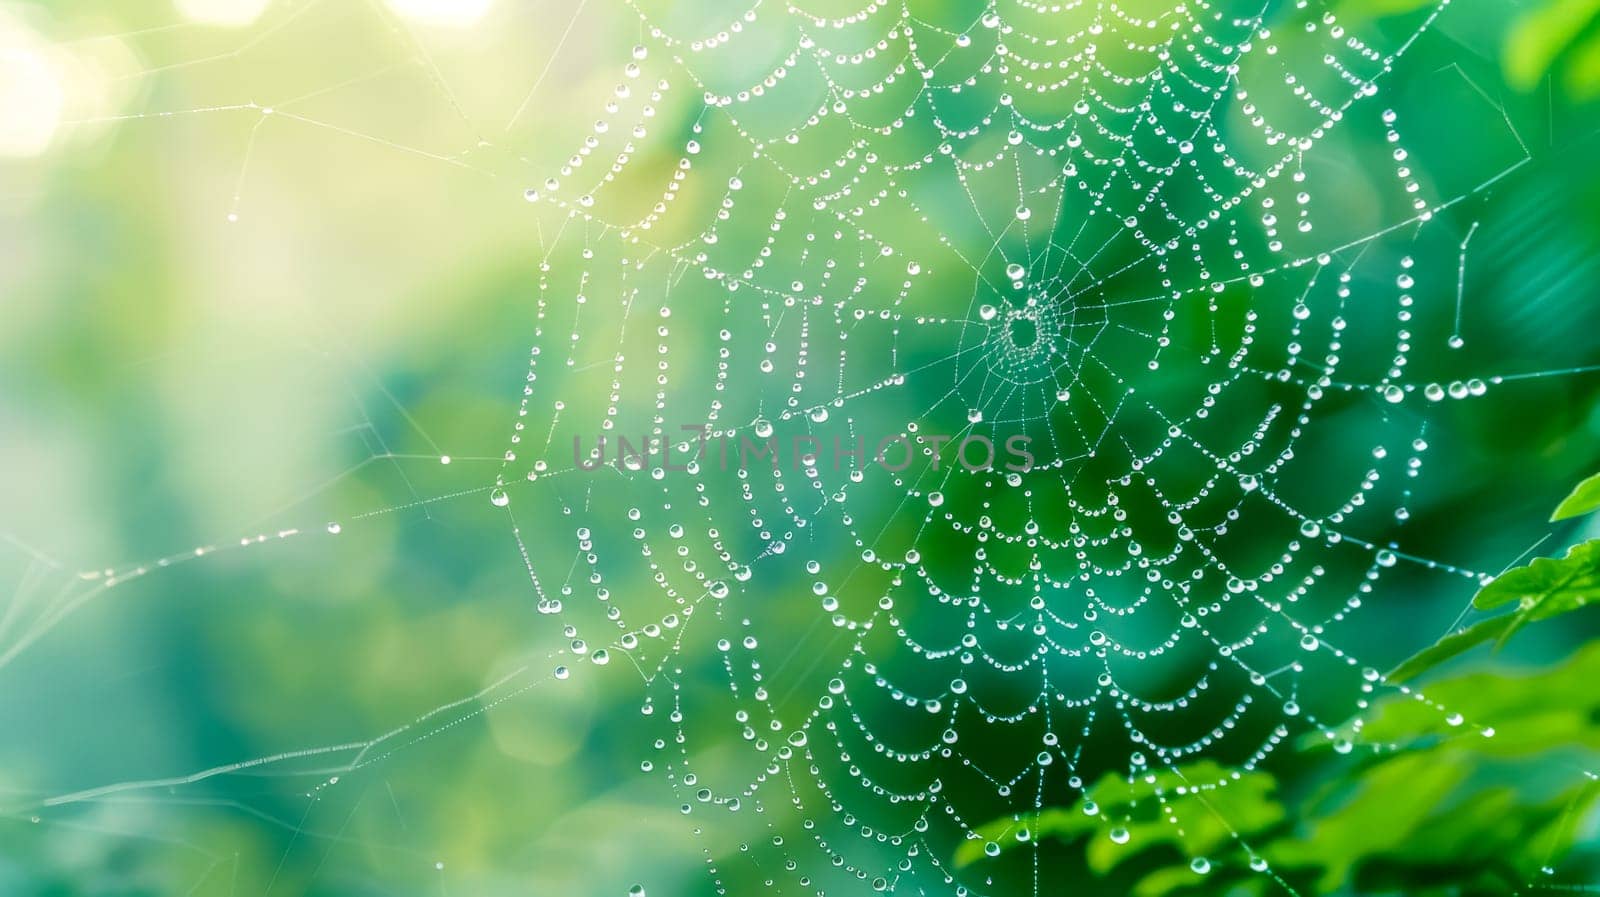 Close-up of a delicate spider web with glistening dewdrops against a soft green nature background